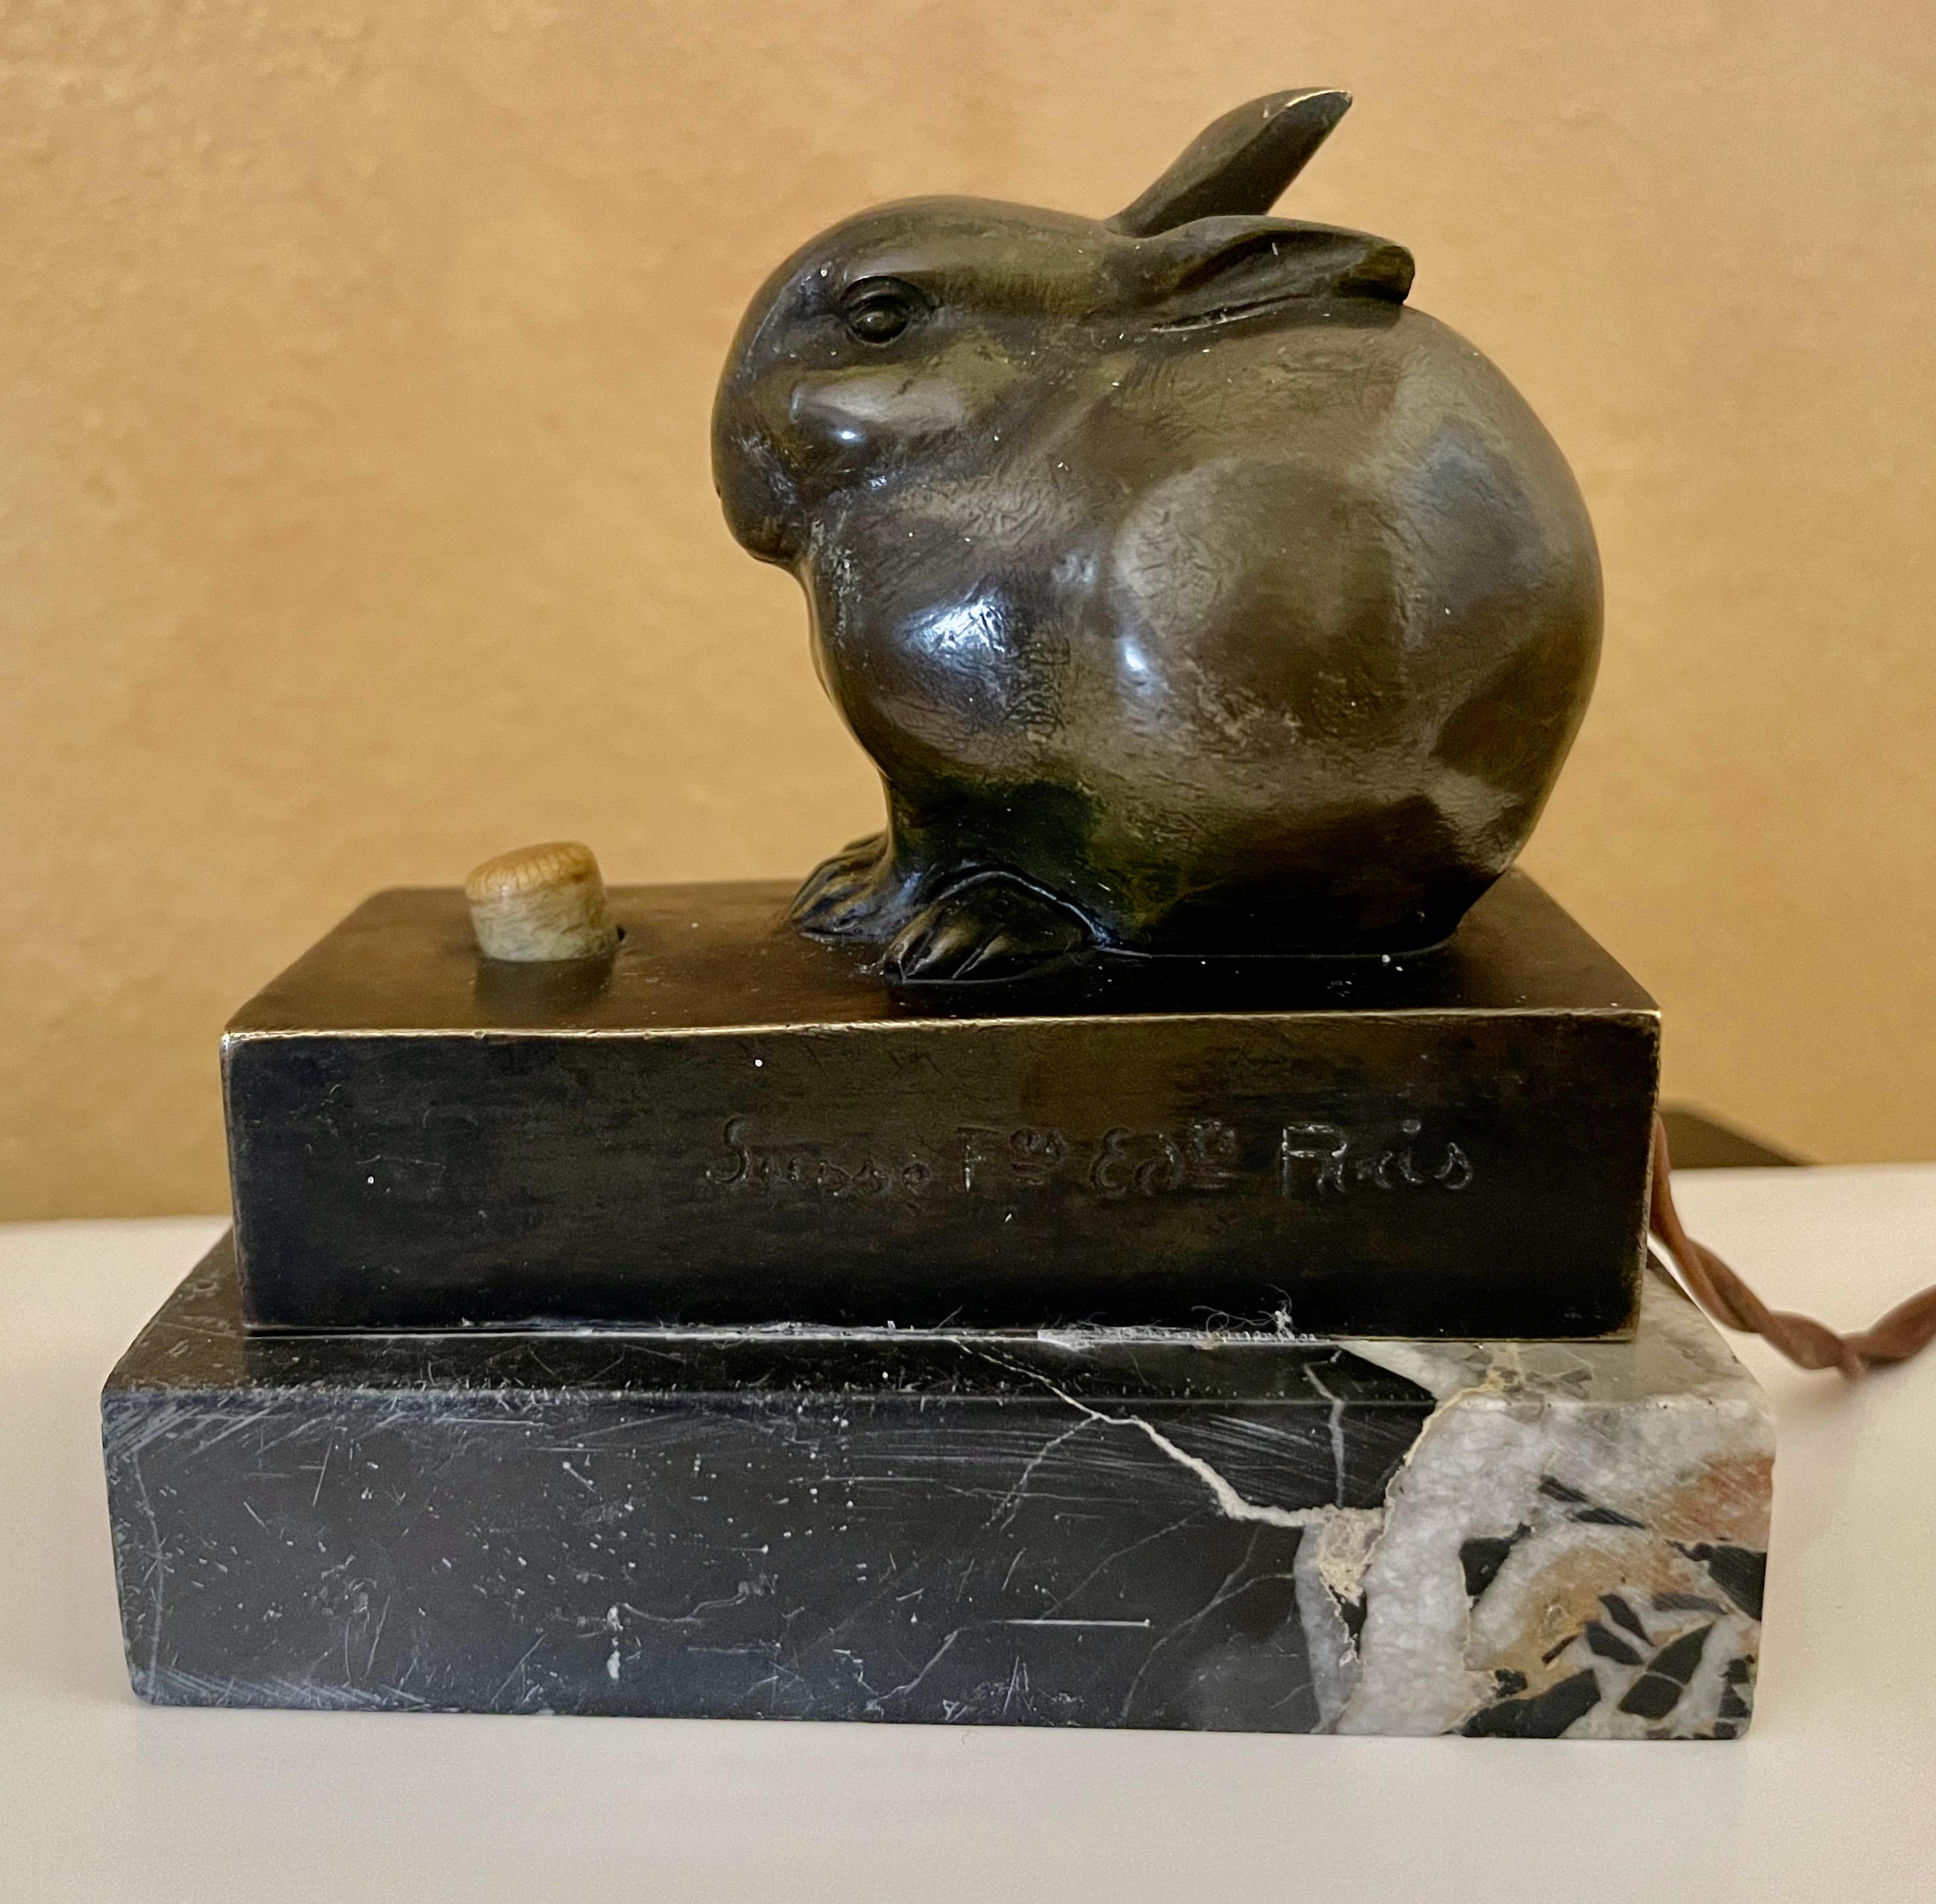 Bronze rabbit figurine, circa 1920, finished in original dark patinated bronze, signed around the lower edge, E.M. Sandoz also with “Susse F. Ed Paris” signature as well. Sitting on a bronze base and mounted on a marble base. Fun and unusual details